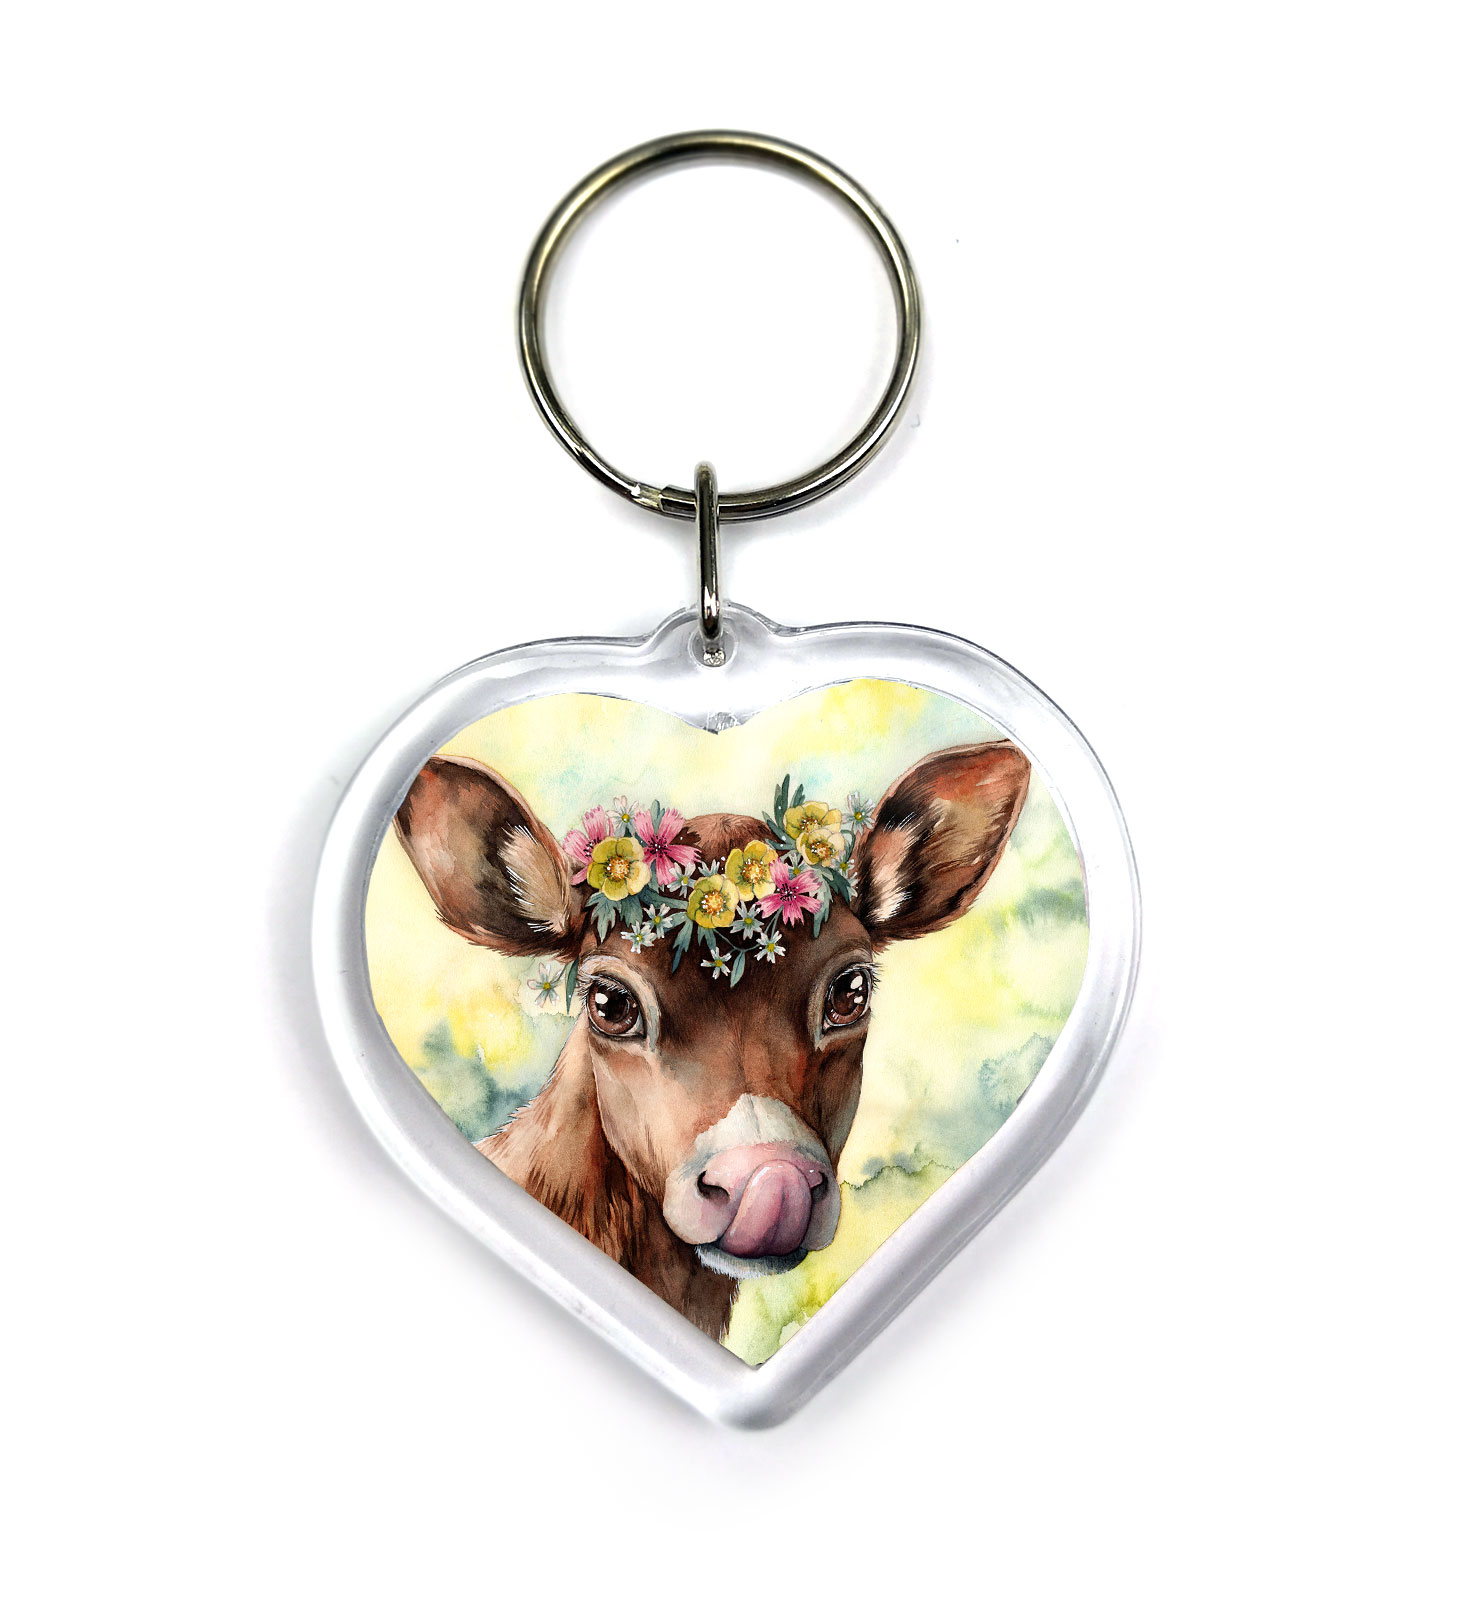 Keychain - Calf with a Flower Crown